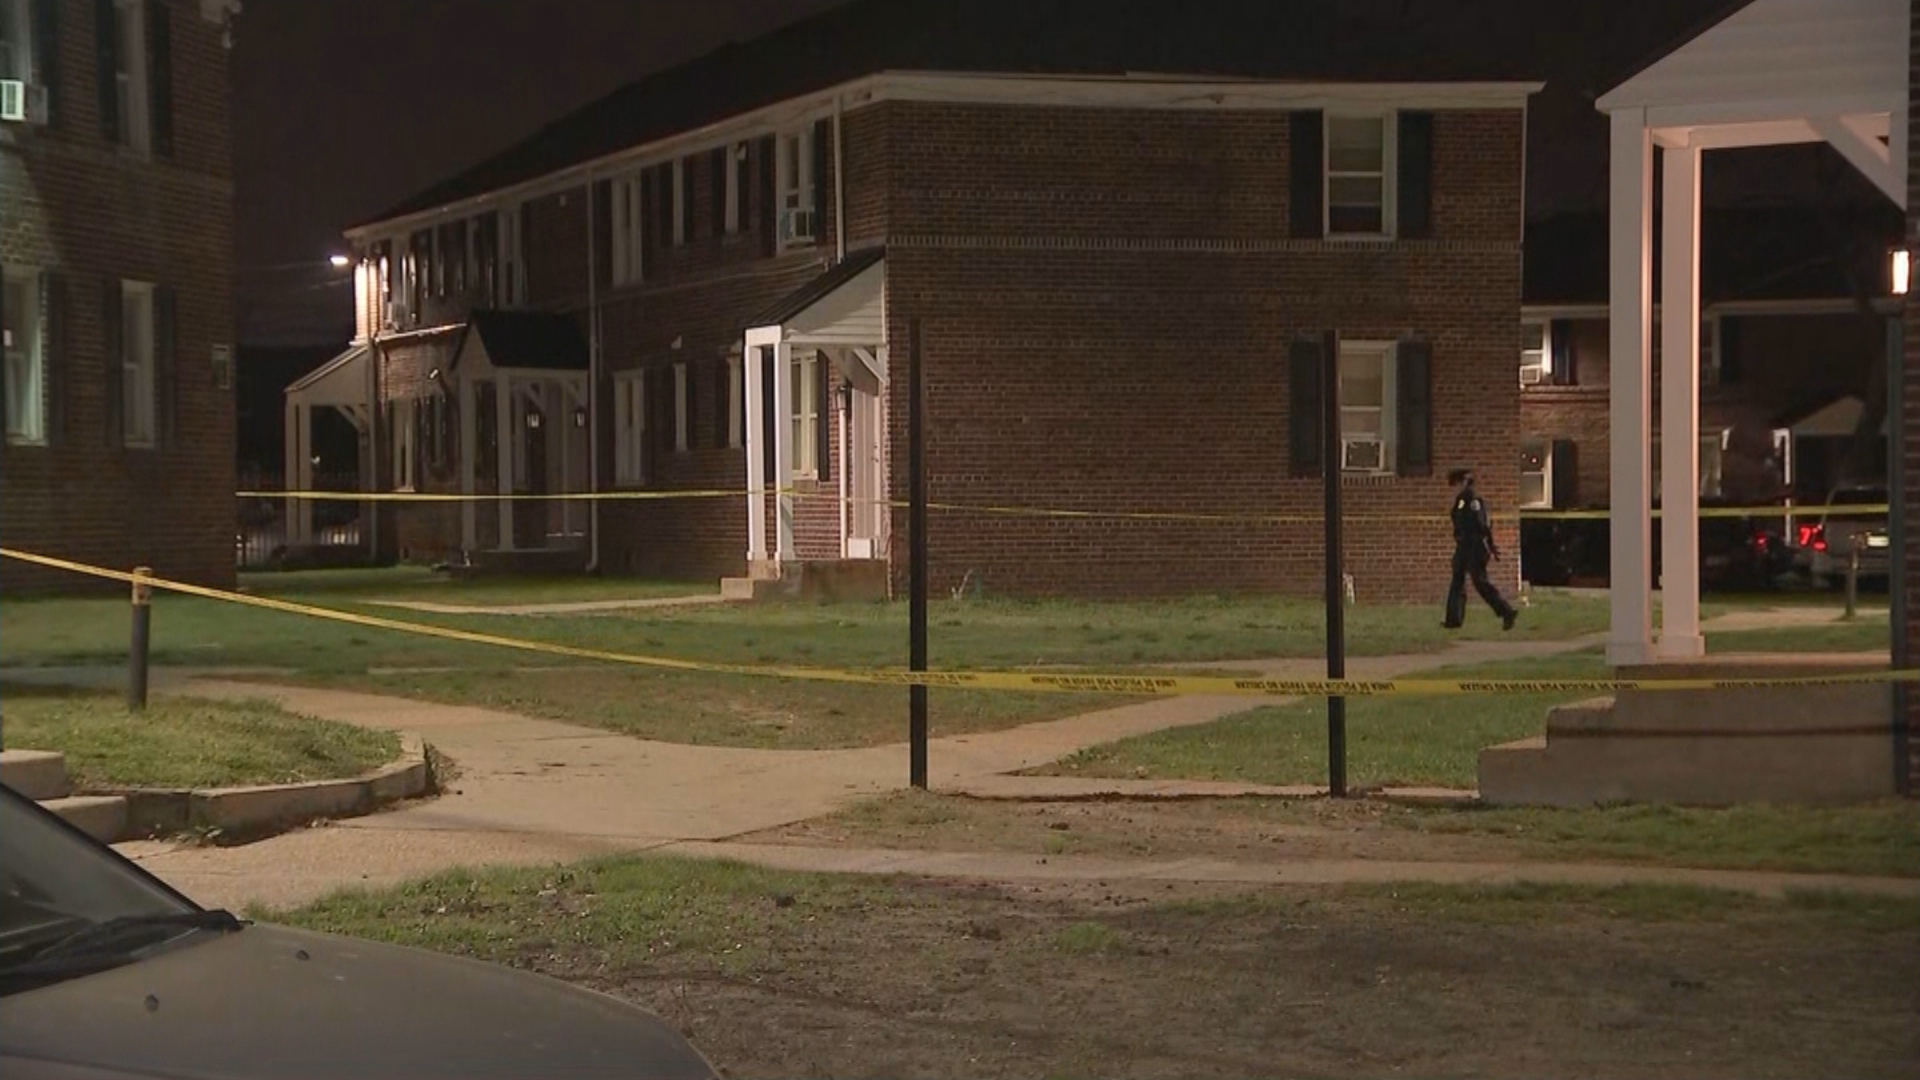 Shooting At Crestbury Apartment Complex In Camden Leaves Man Injured, Spokesperson Says